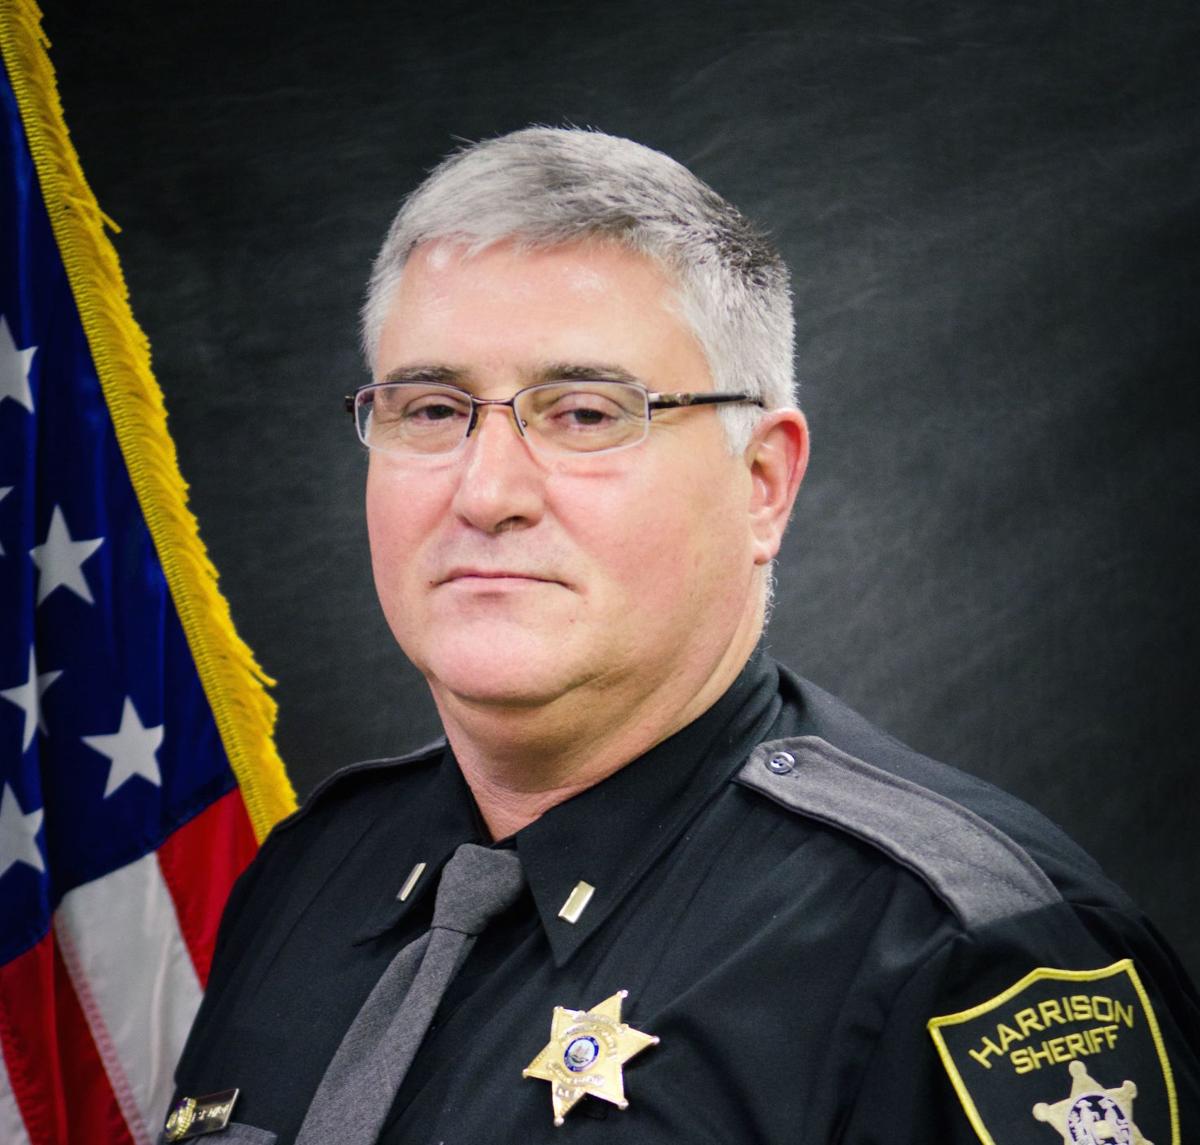 Harrison County Sheriff’s Office restructures command staff | Harrison